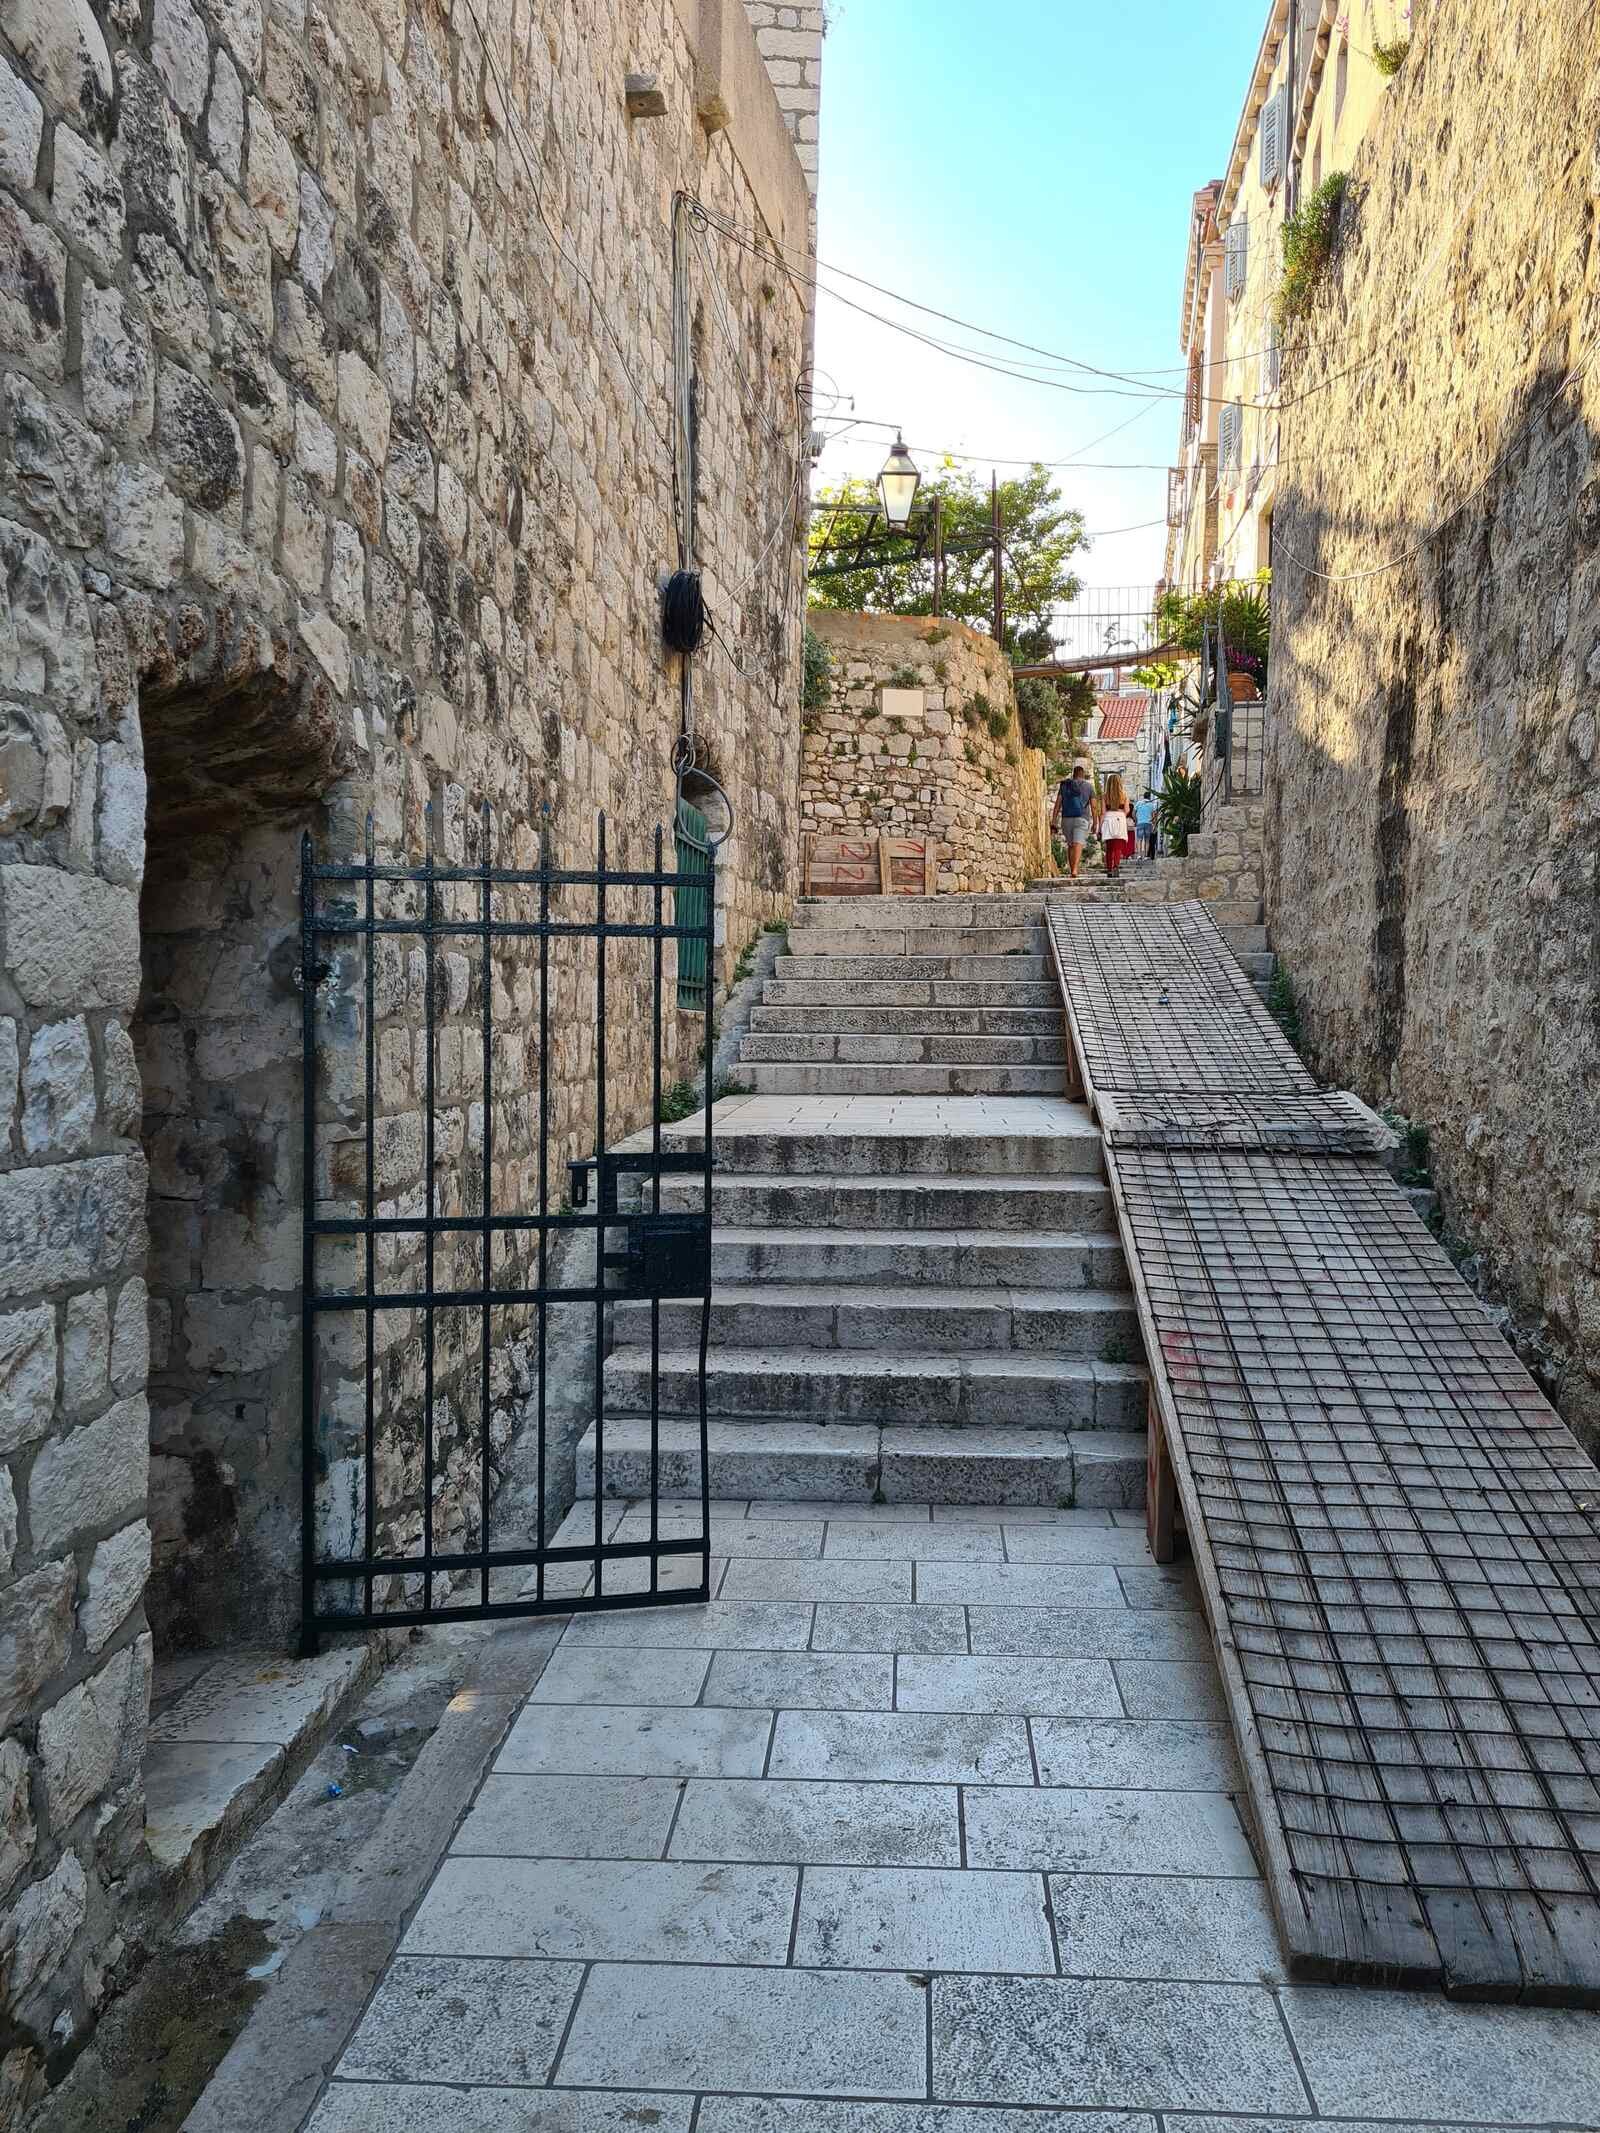 A cobble street with stone walls and steps leading up. A black iron gate is open in the wall on the left side